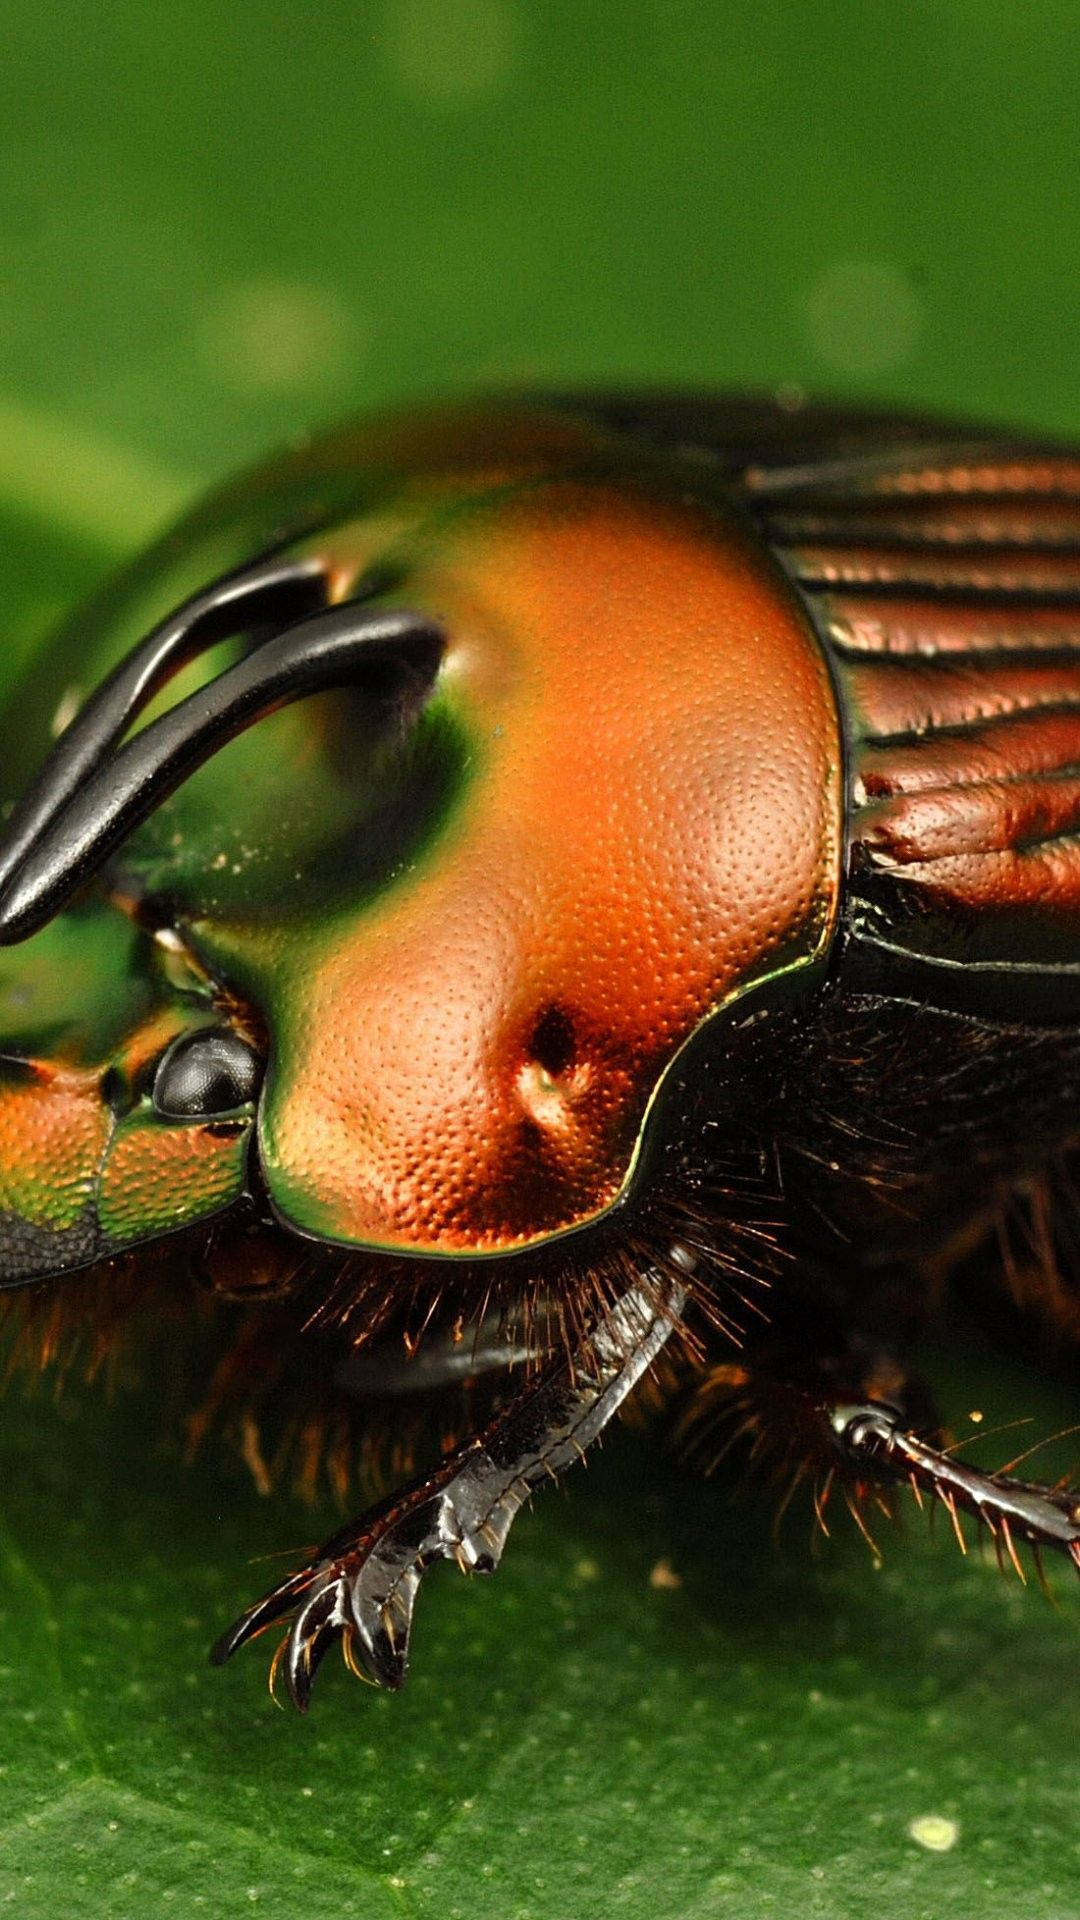 Insect Beetle With Iridescent Body Wallpaper